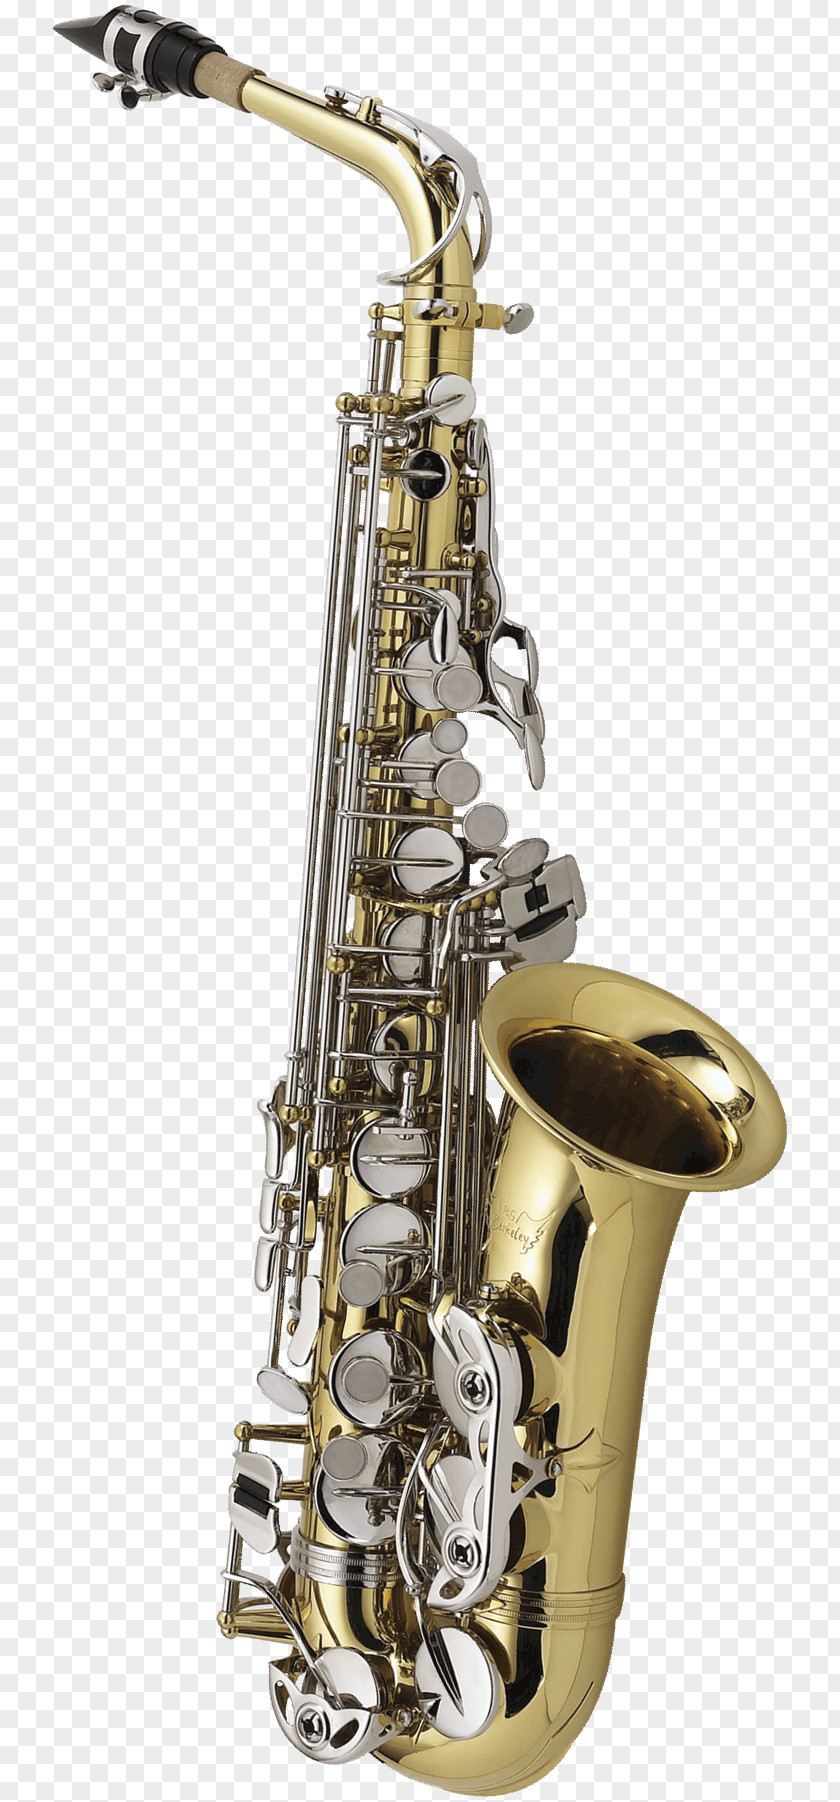 Trumpet And Saxophone Alto Musical Instruments Orchestra Yamaha Corporation PNG